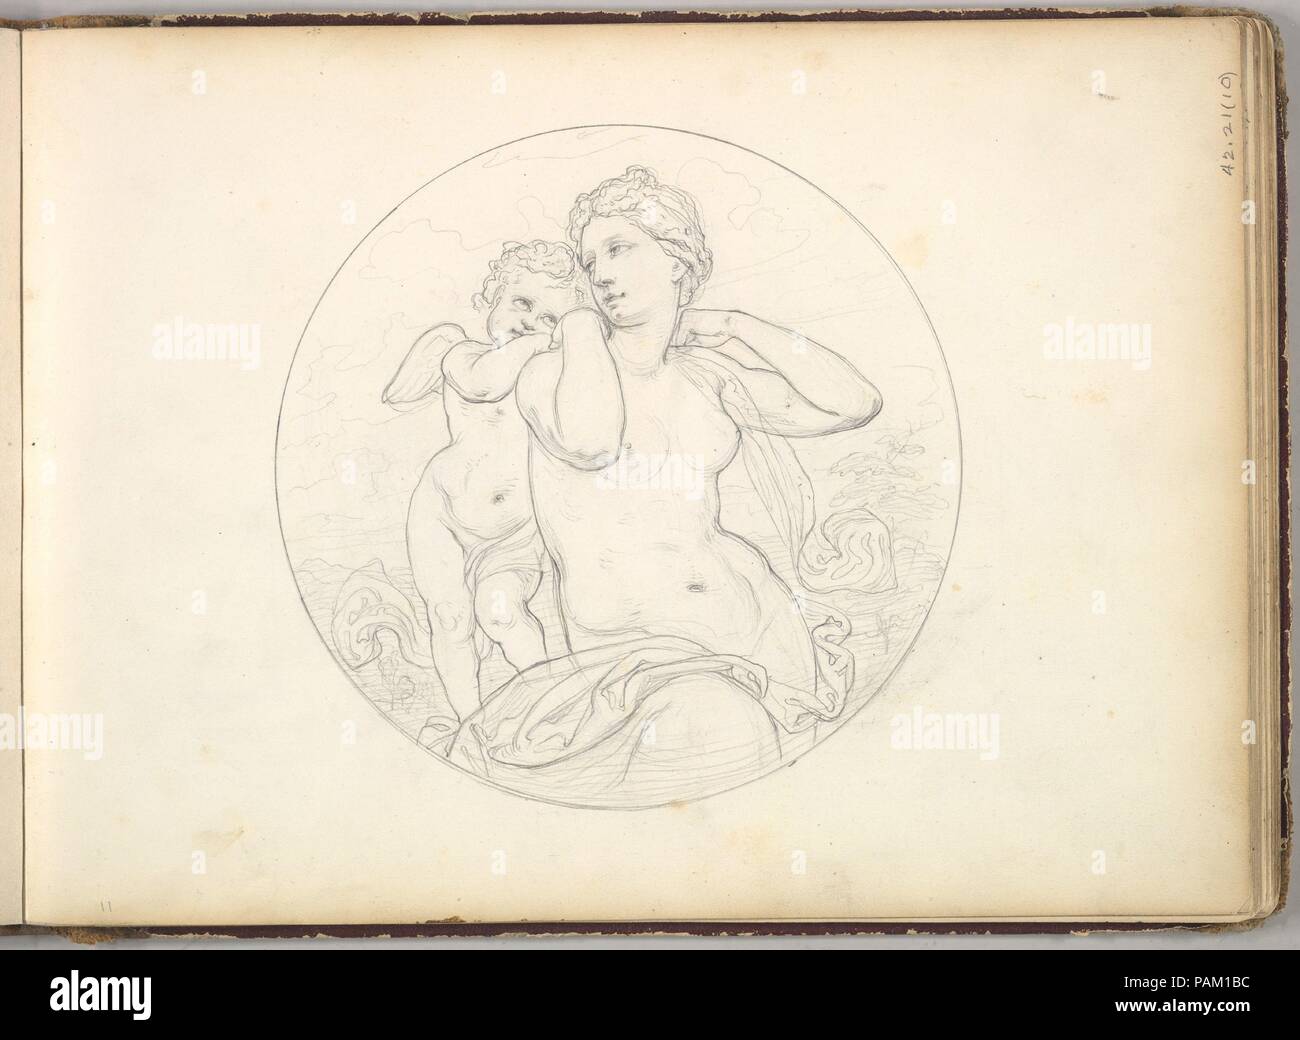 Venus and Cupid  (in Sketch Book With Drawings on Twenty-six Leaves). Artist: Frederic, Lord Leighton (British, Scarborough 1830-1896 London). Dimensions: Sheet (page): 7 7/8 x 10 7/8 in. (20 x 27.6 cm). Date: ca. 1849. Museum: Metropolitan Museum of Art, New York, USA. Stock Photo